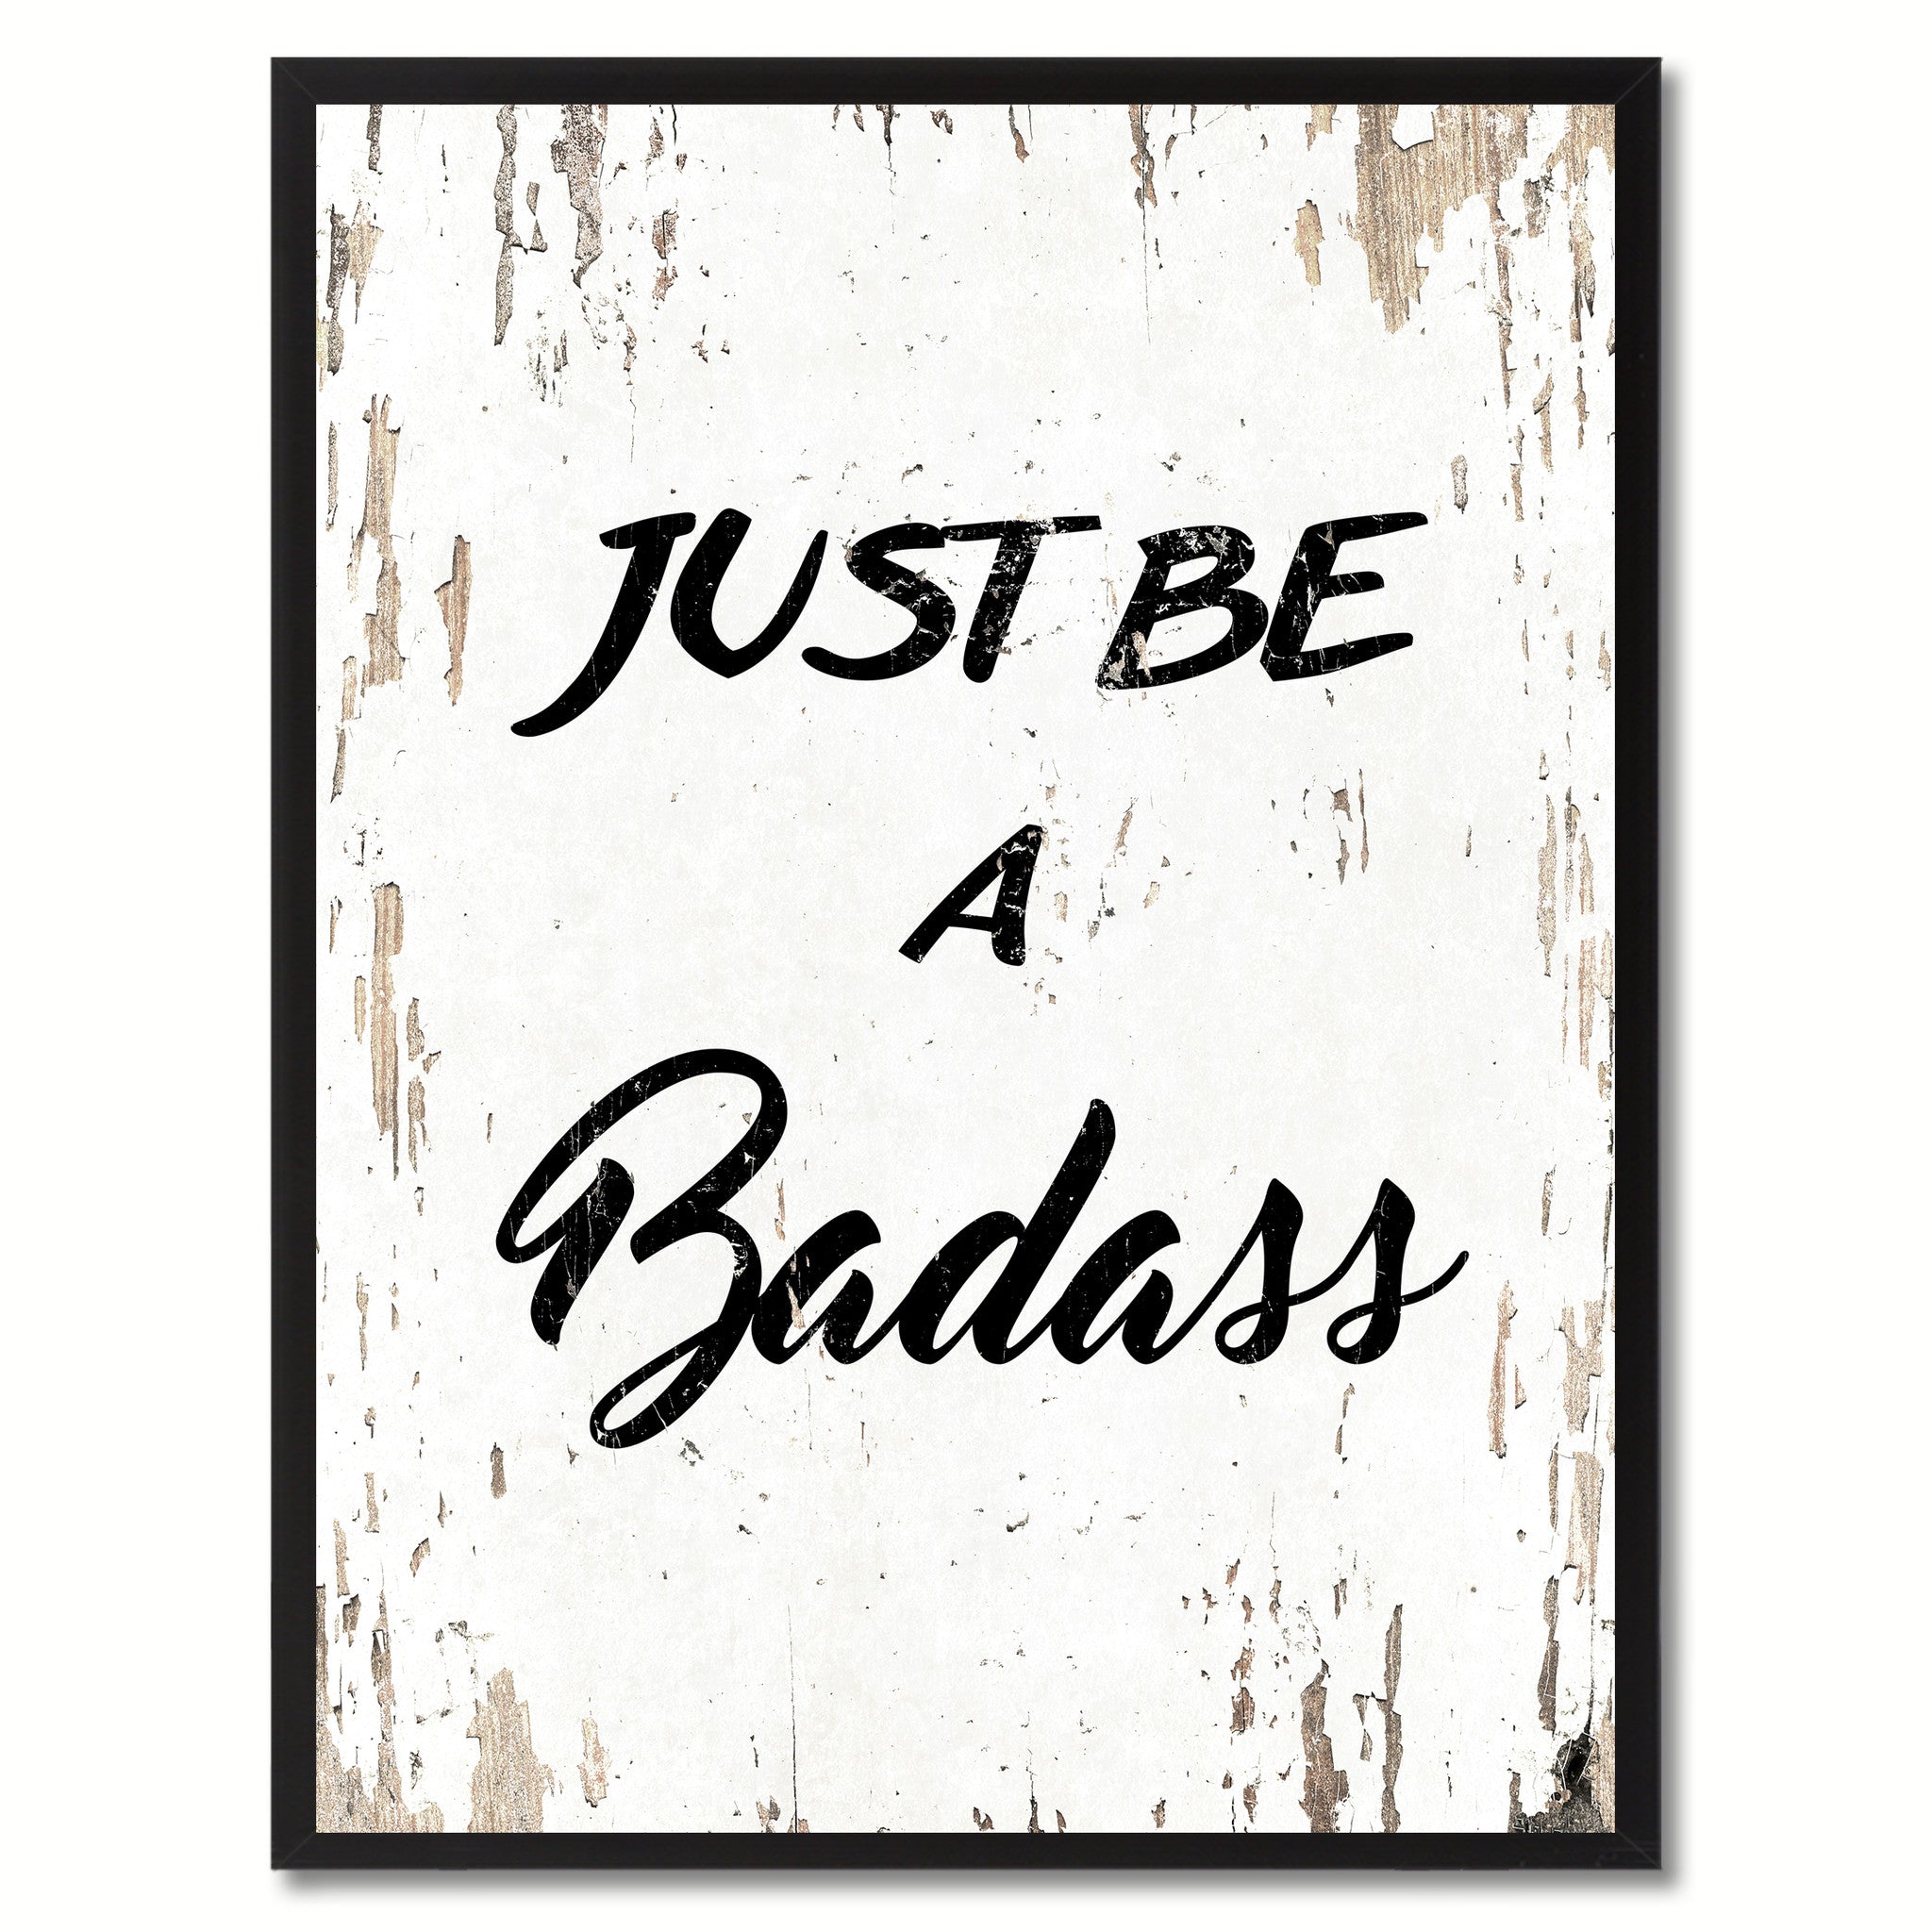 Just be a bada?s Adult Quote Saying Gift Ideas Home Decor Wall Art